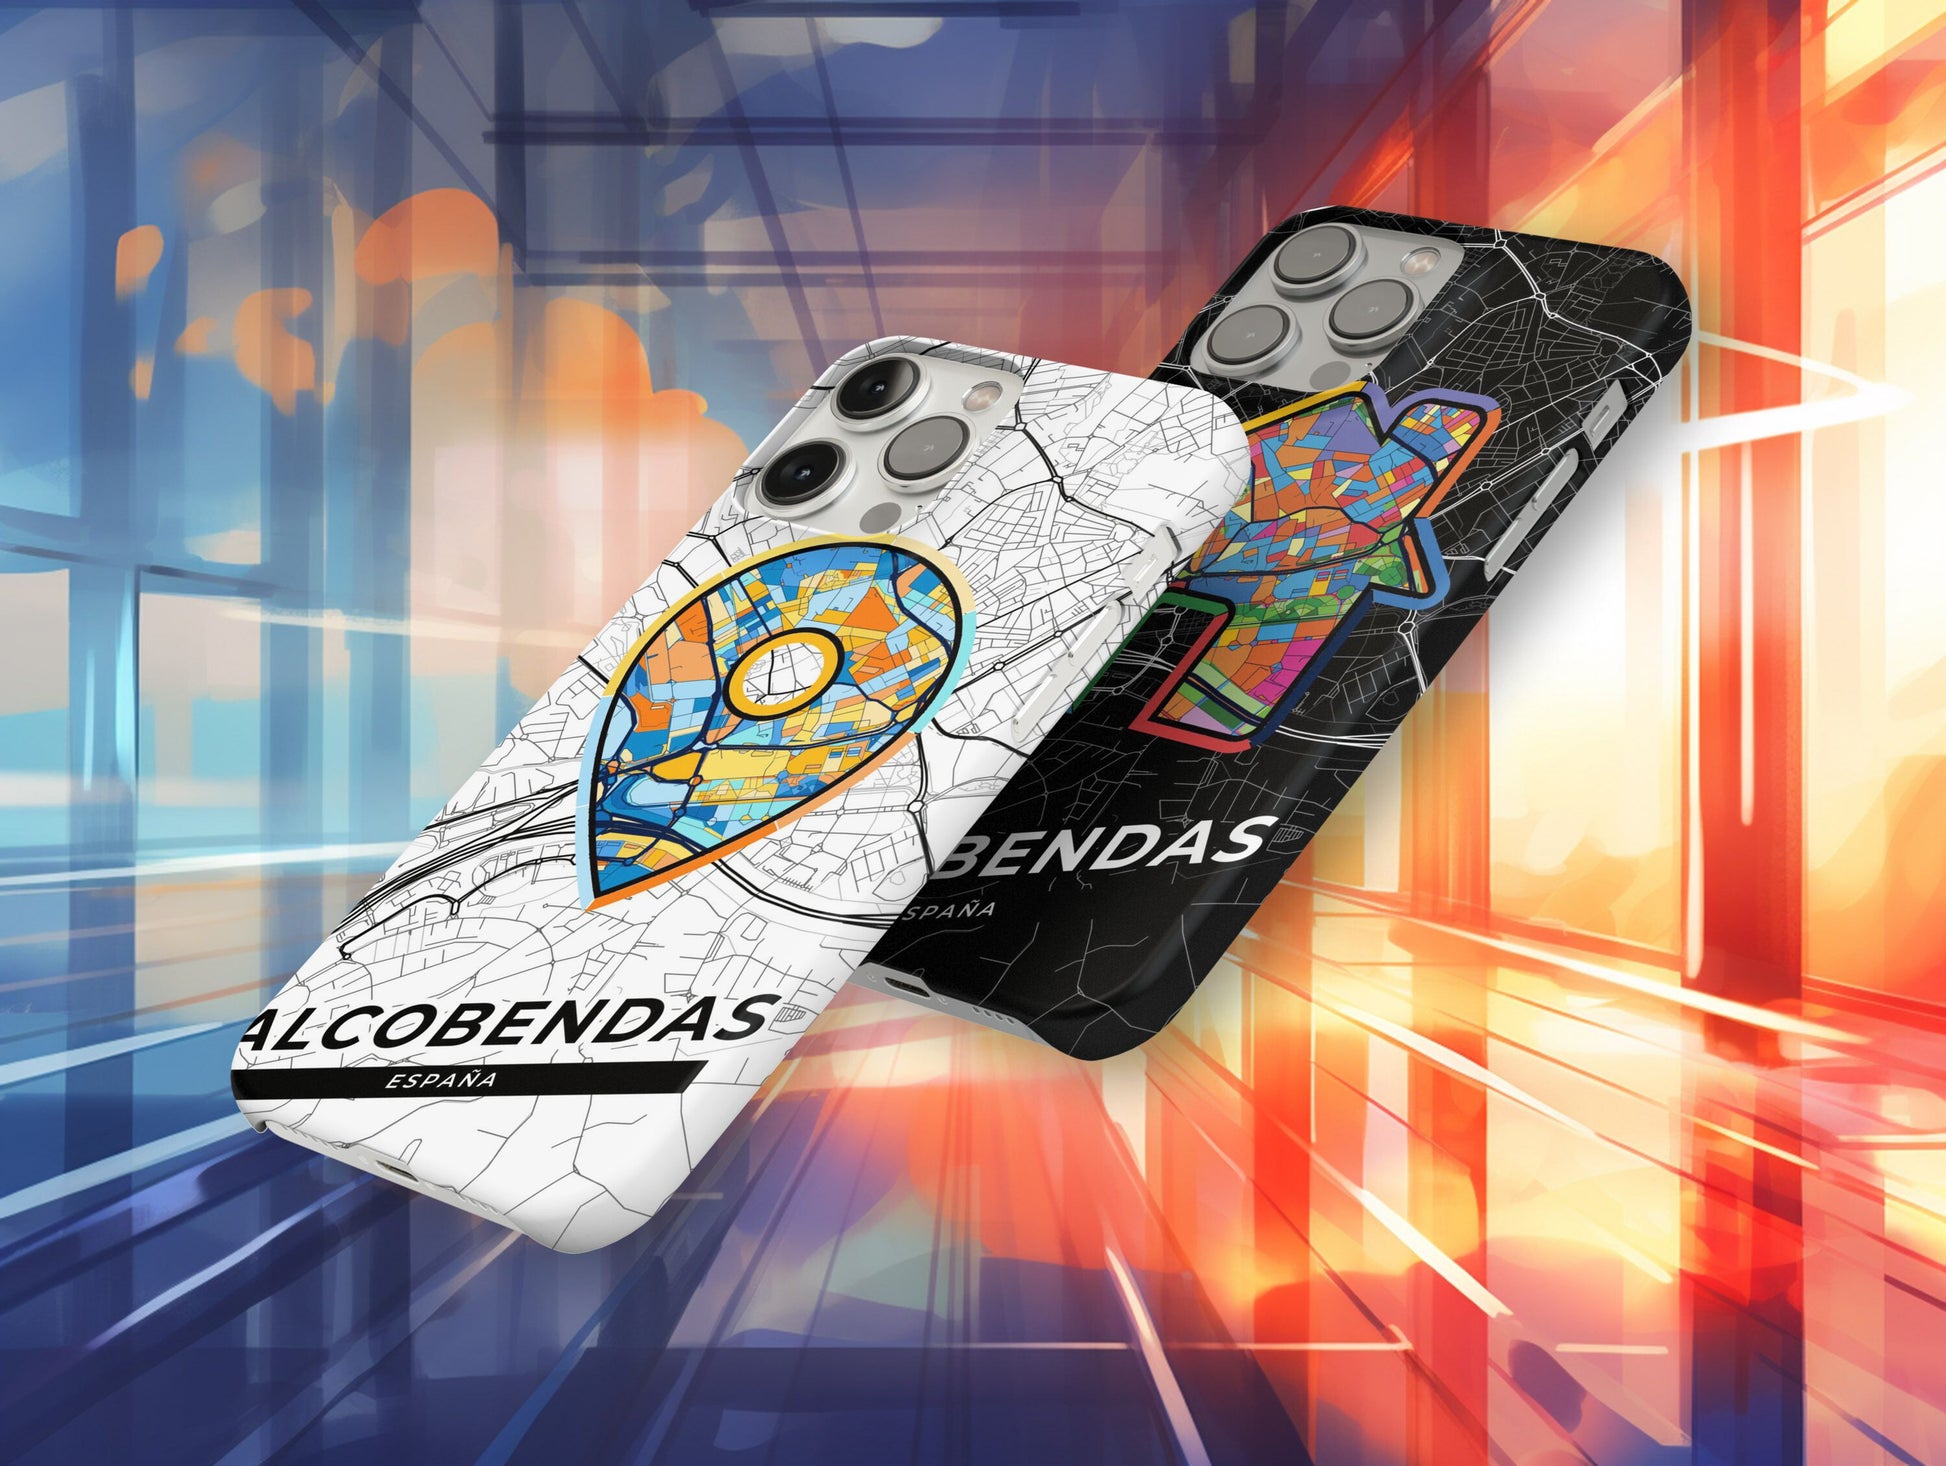 Alcobendas Spain slim phone case with colorful icon. Birthday, wedding or housewarming gift. Couple match cases.